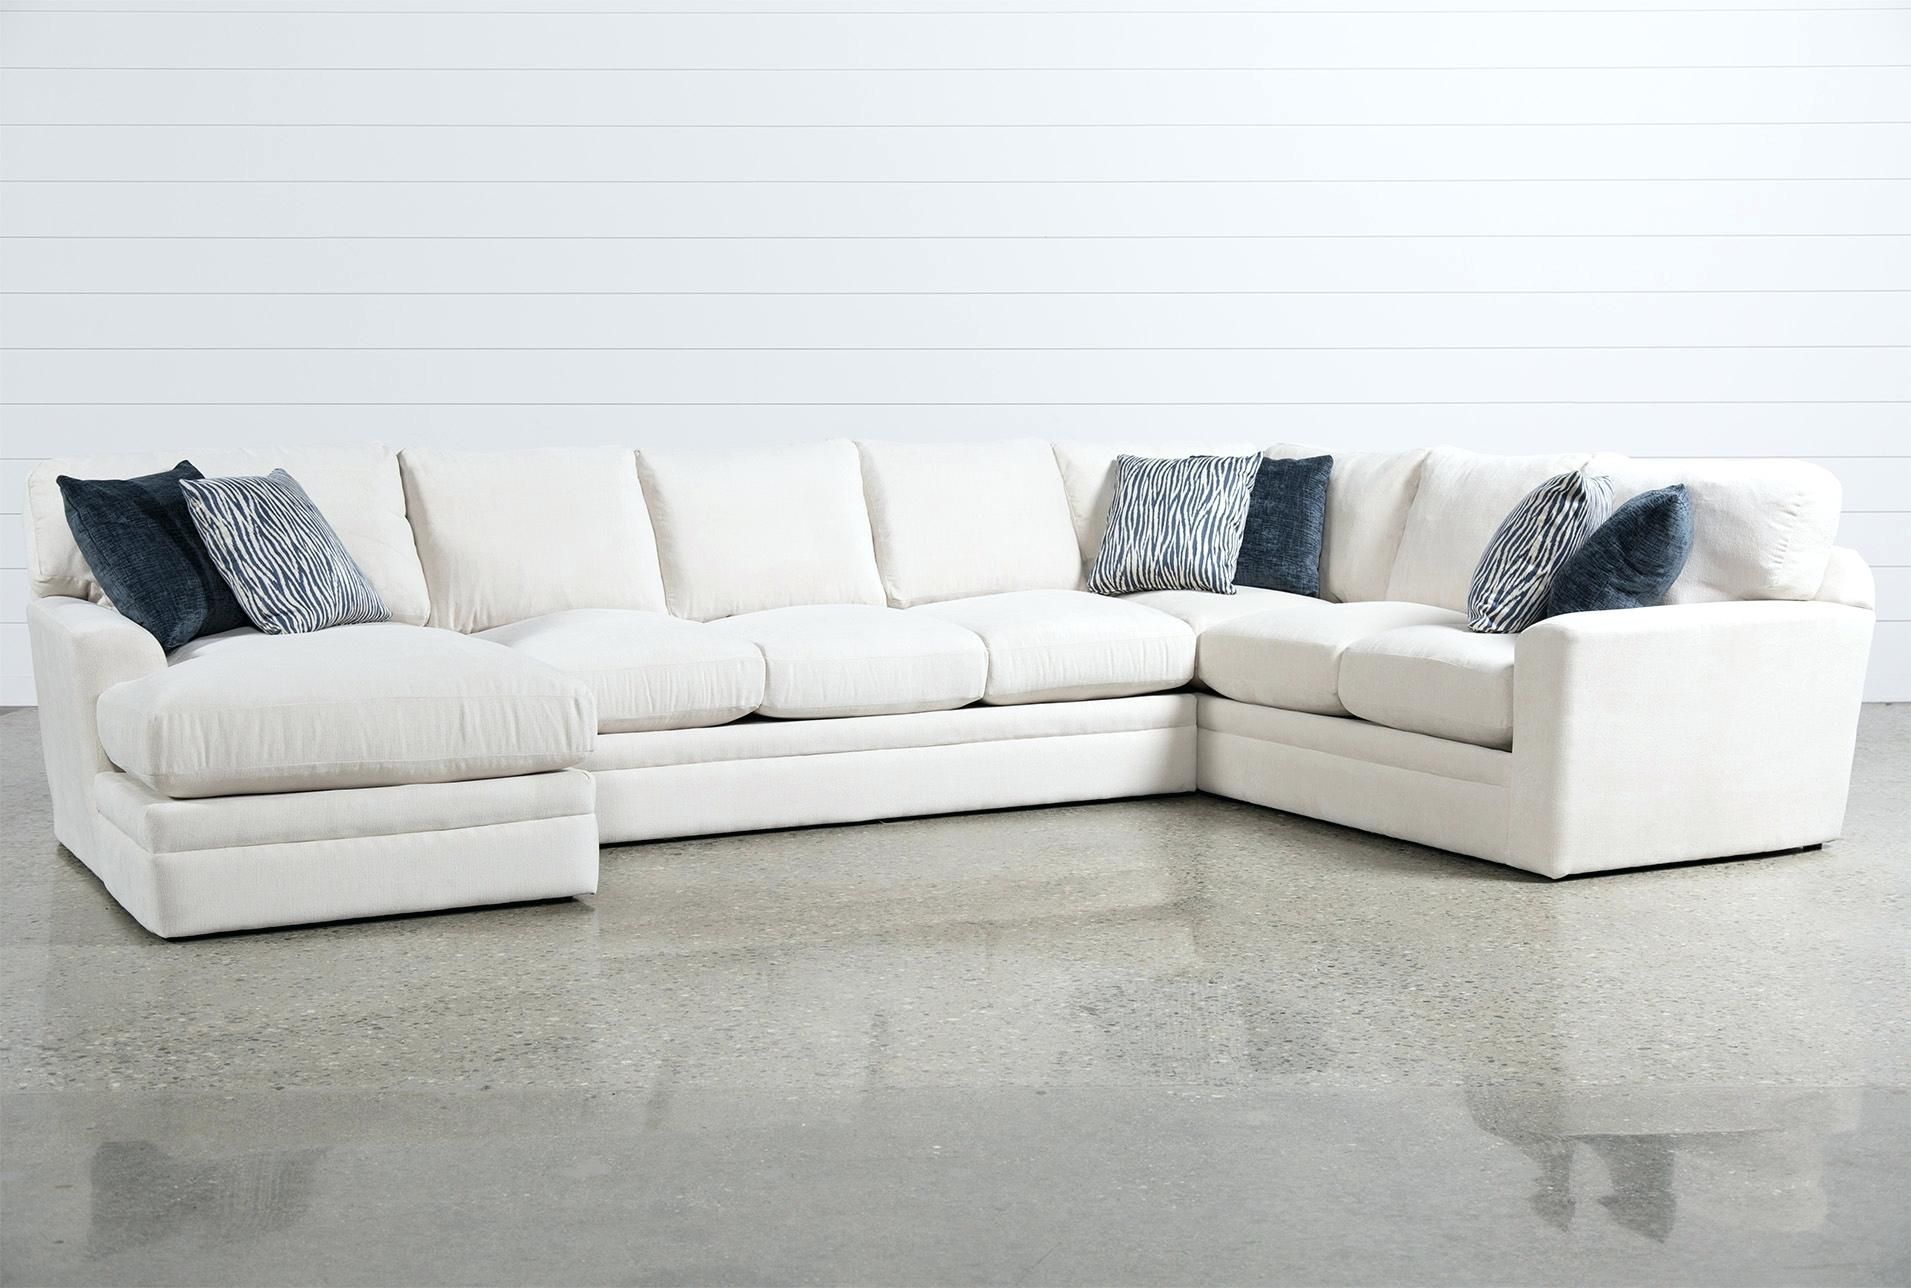 2019 Popular Canada Sale Sectional Sofas